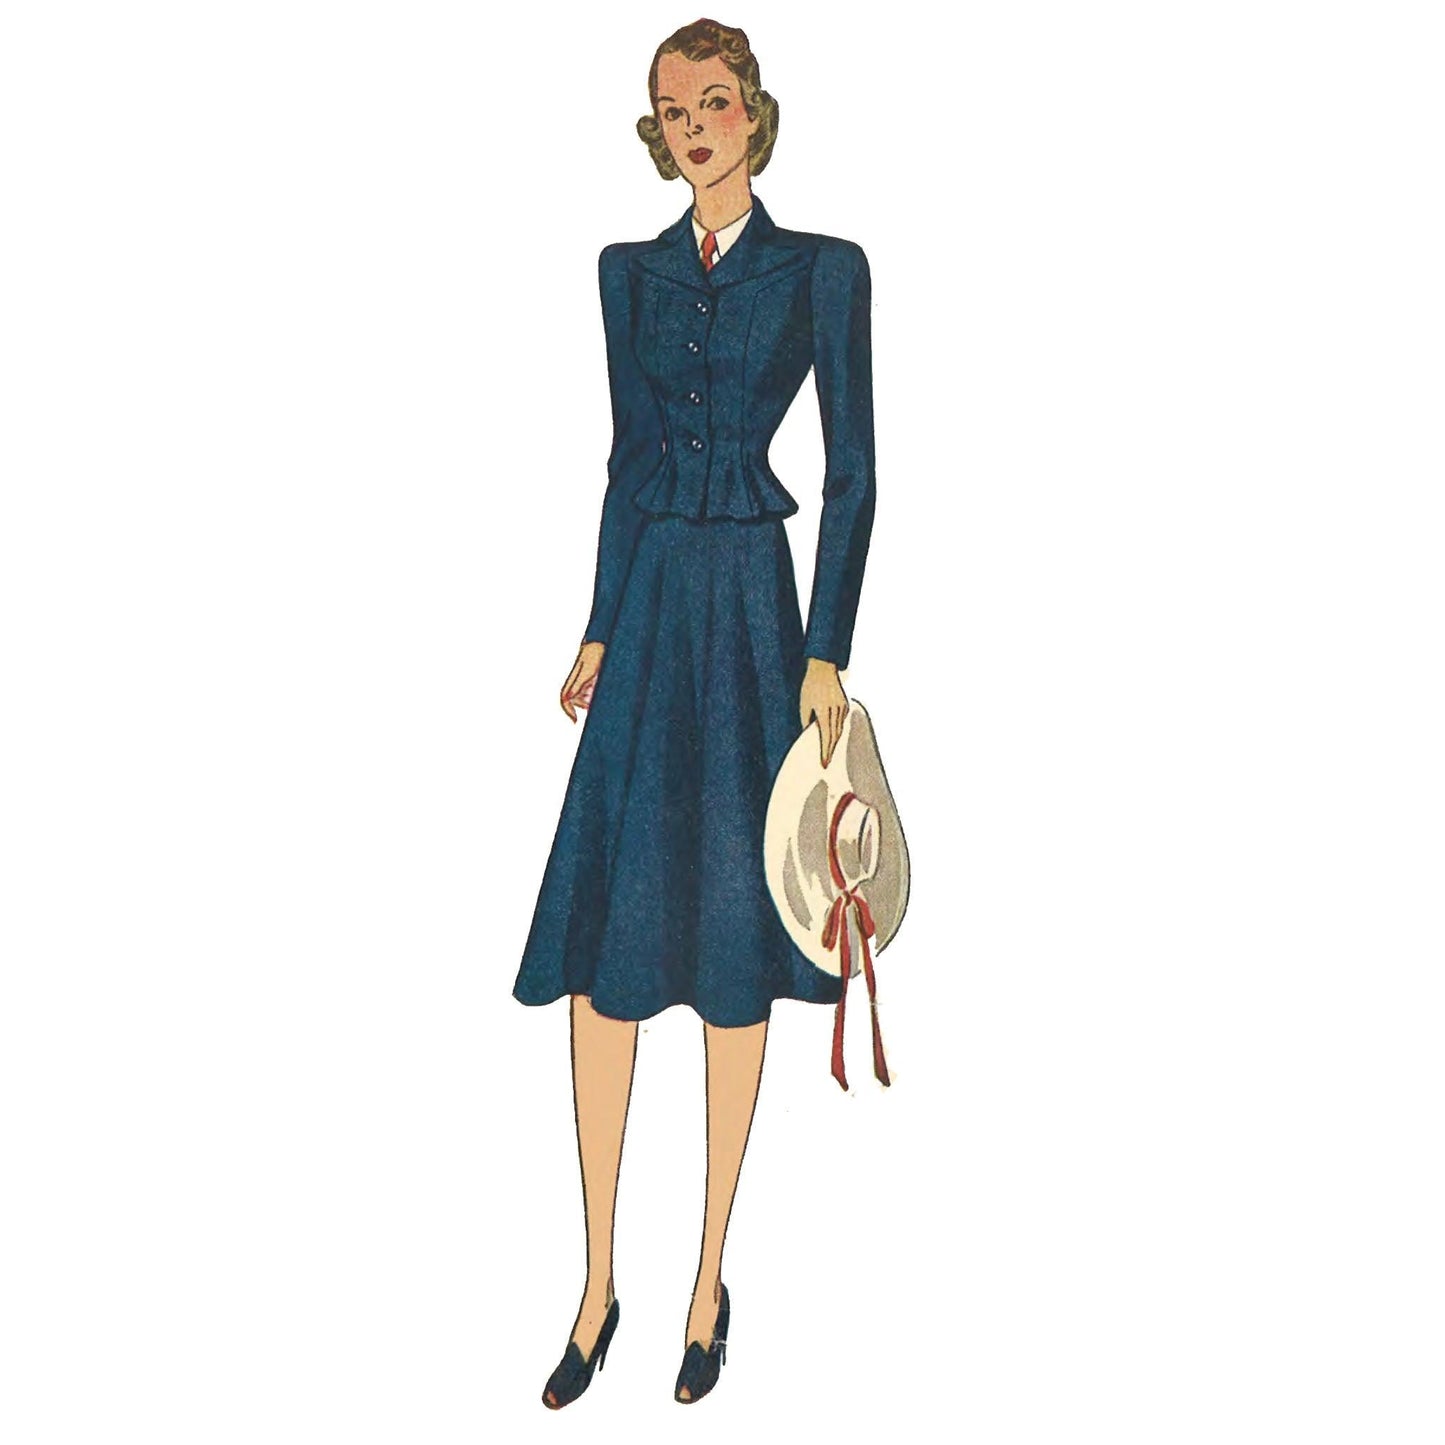 Woman wearing 40s suit and carrying a hat.